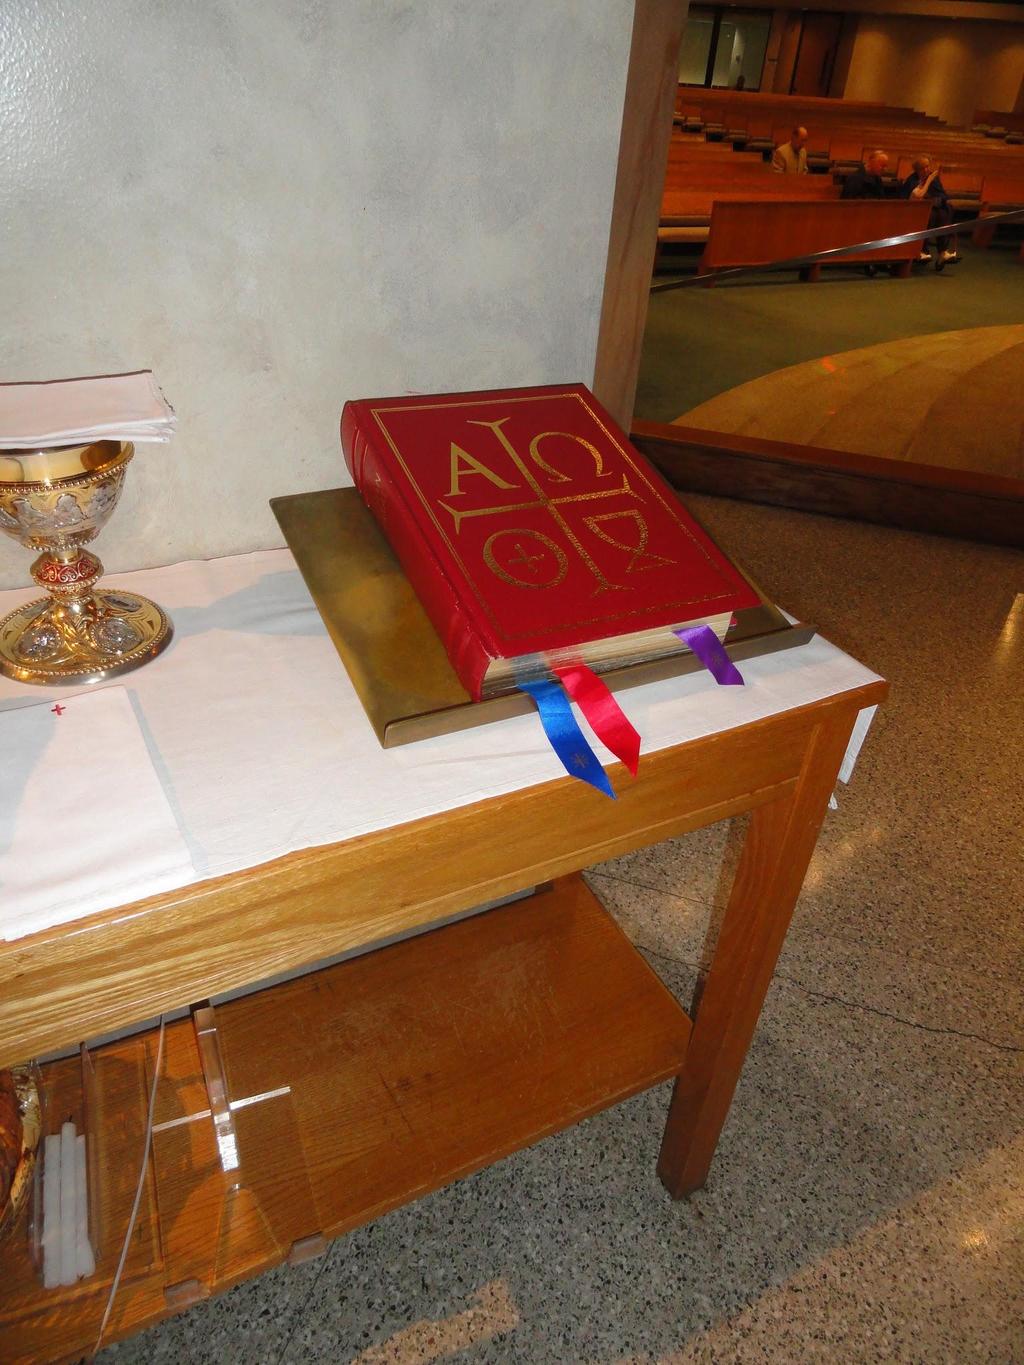 Roman Missal - is the liturgical book that contains the texts and rubric (instructions) for the celebration of the Mass.